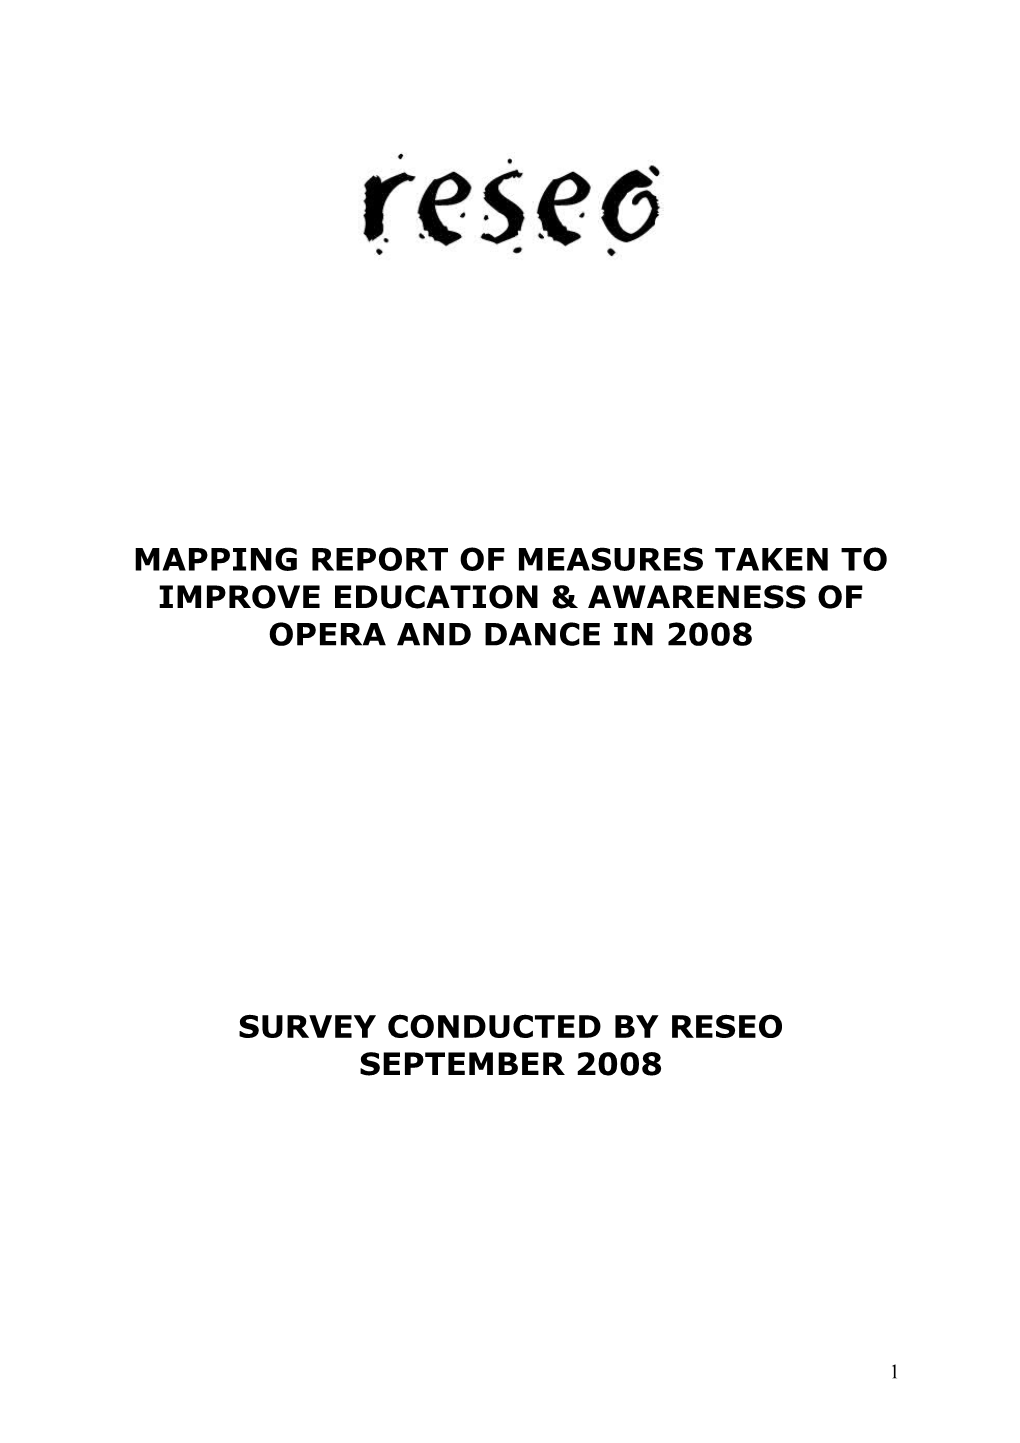 Mapping Report of Measures Taken to Improve Education & Awareness of Opera and Dance in 2008